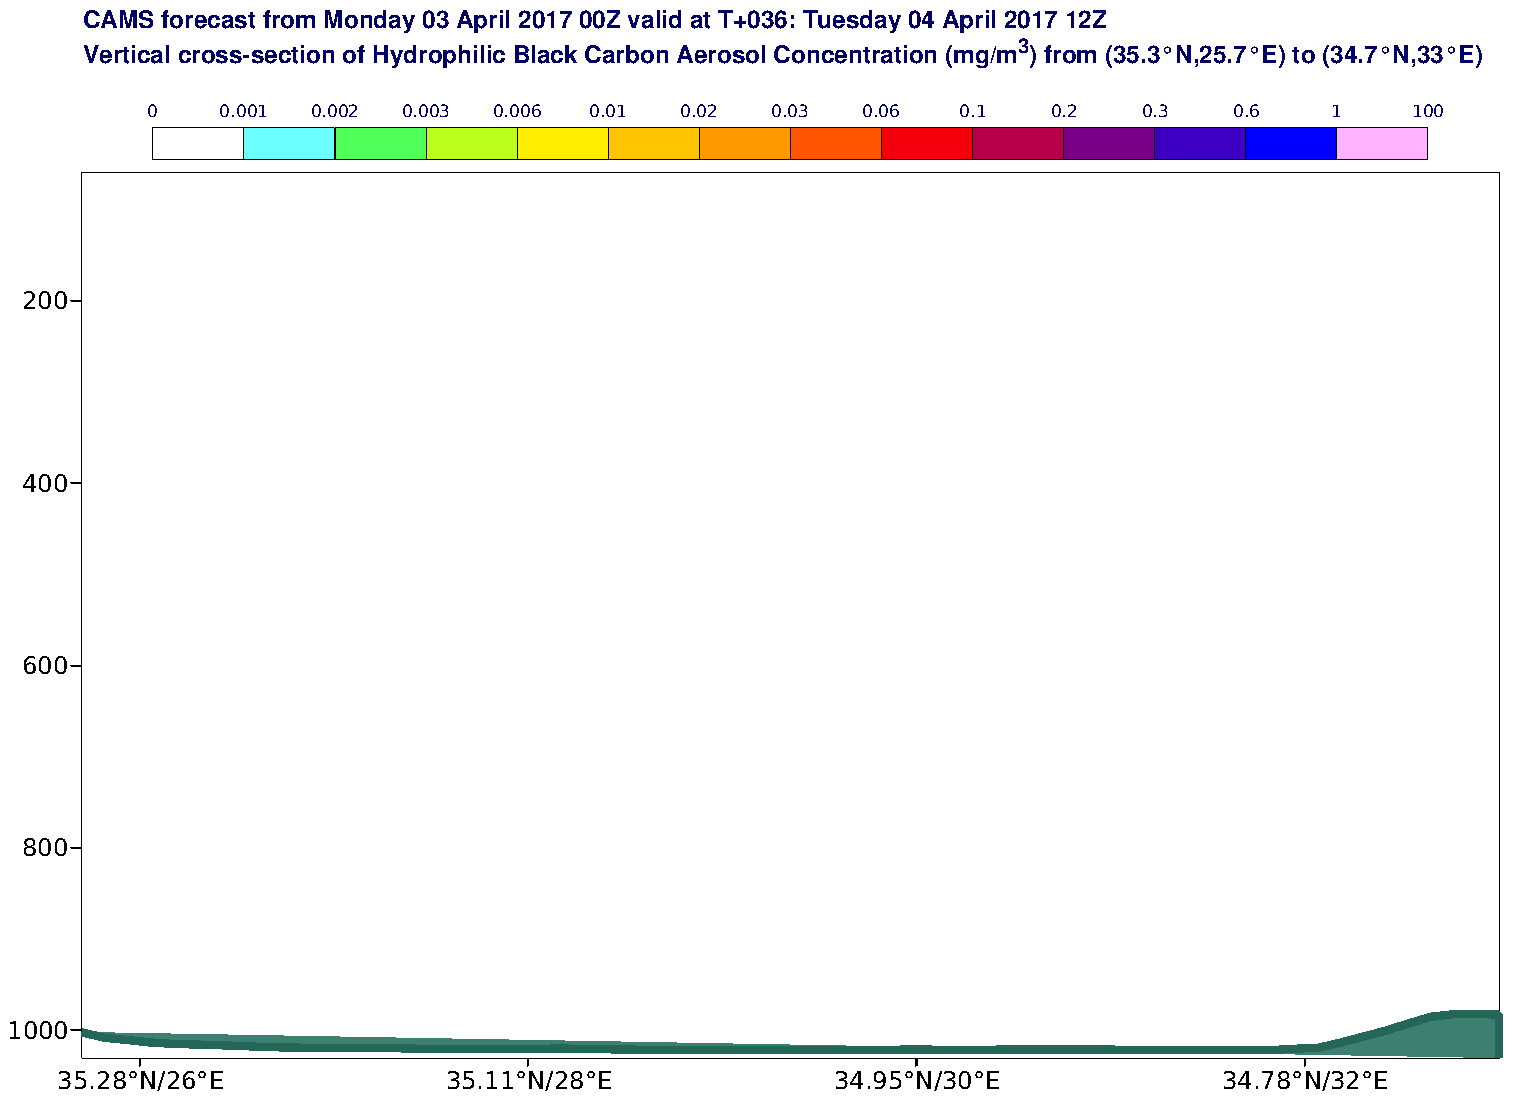 Vertical cross-section of Hydrophilic Black Carbon Aerosol Concentration (mg/m3) valid at T36 - 2017-04-04 12:00